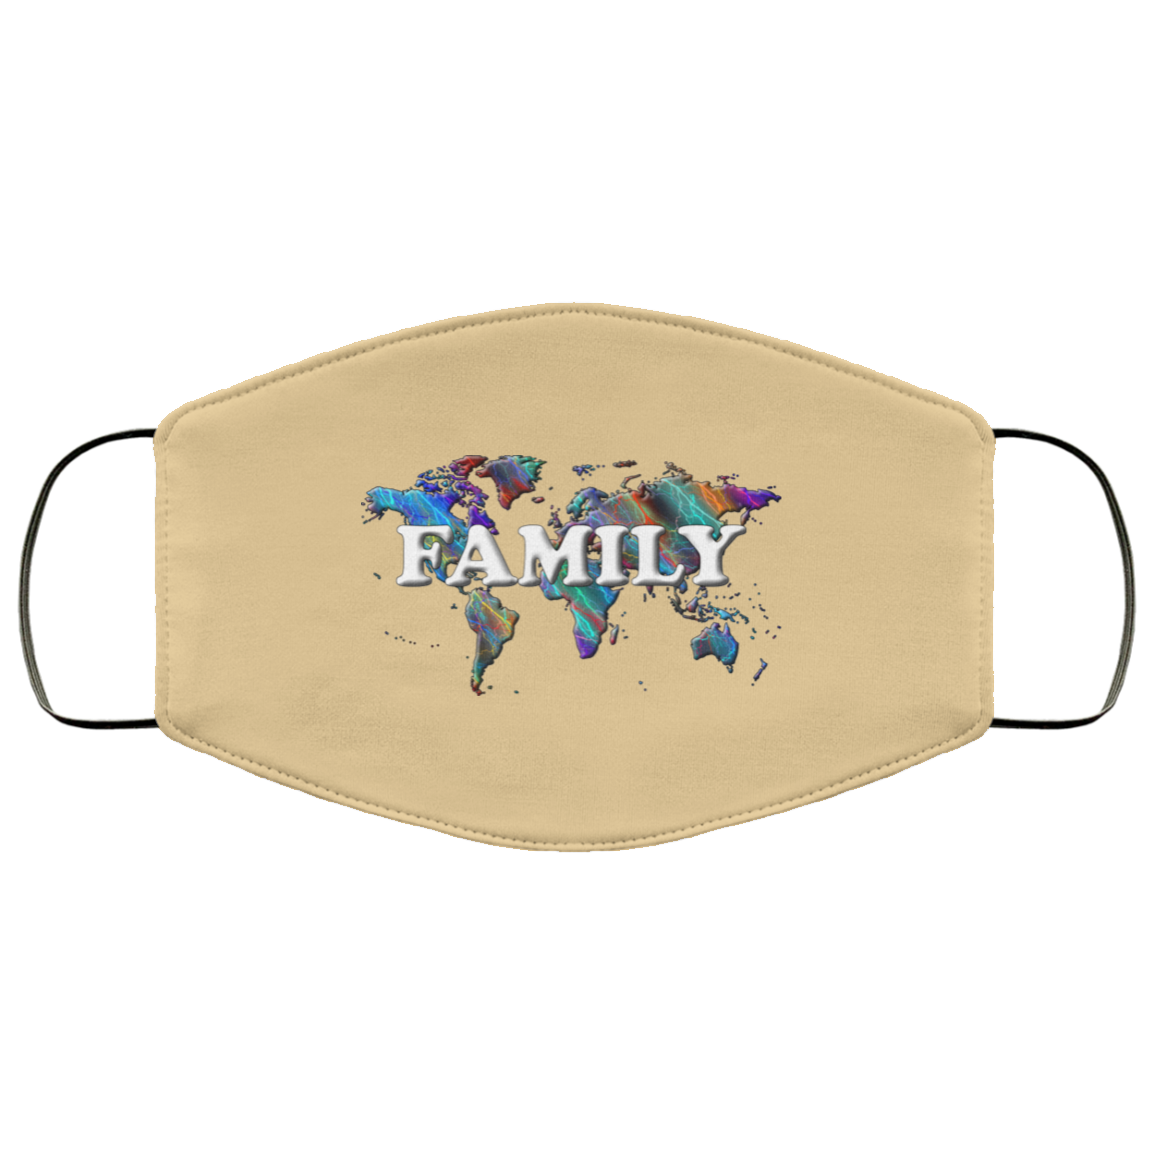 Family 2 Layer Protective Mask